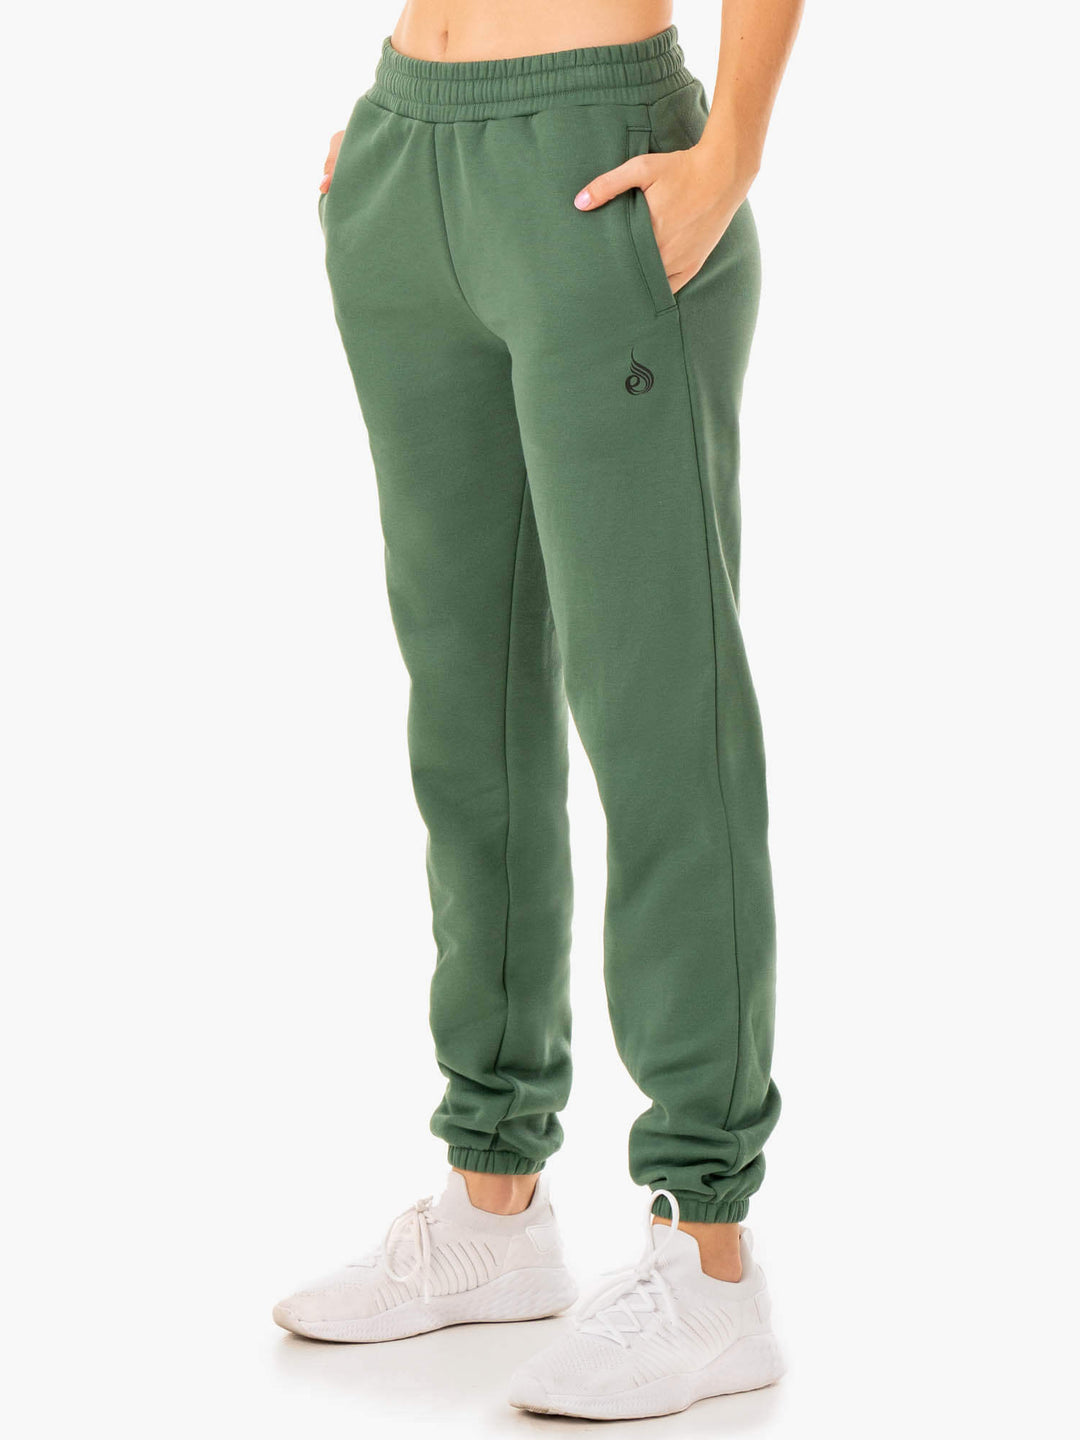 Unisex Track Pants - Forest Green - Ryderwear